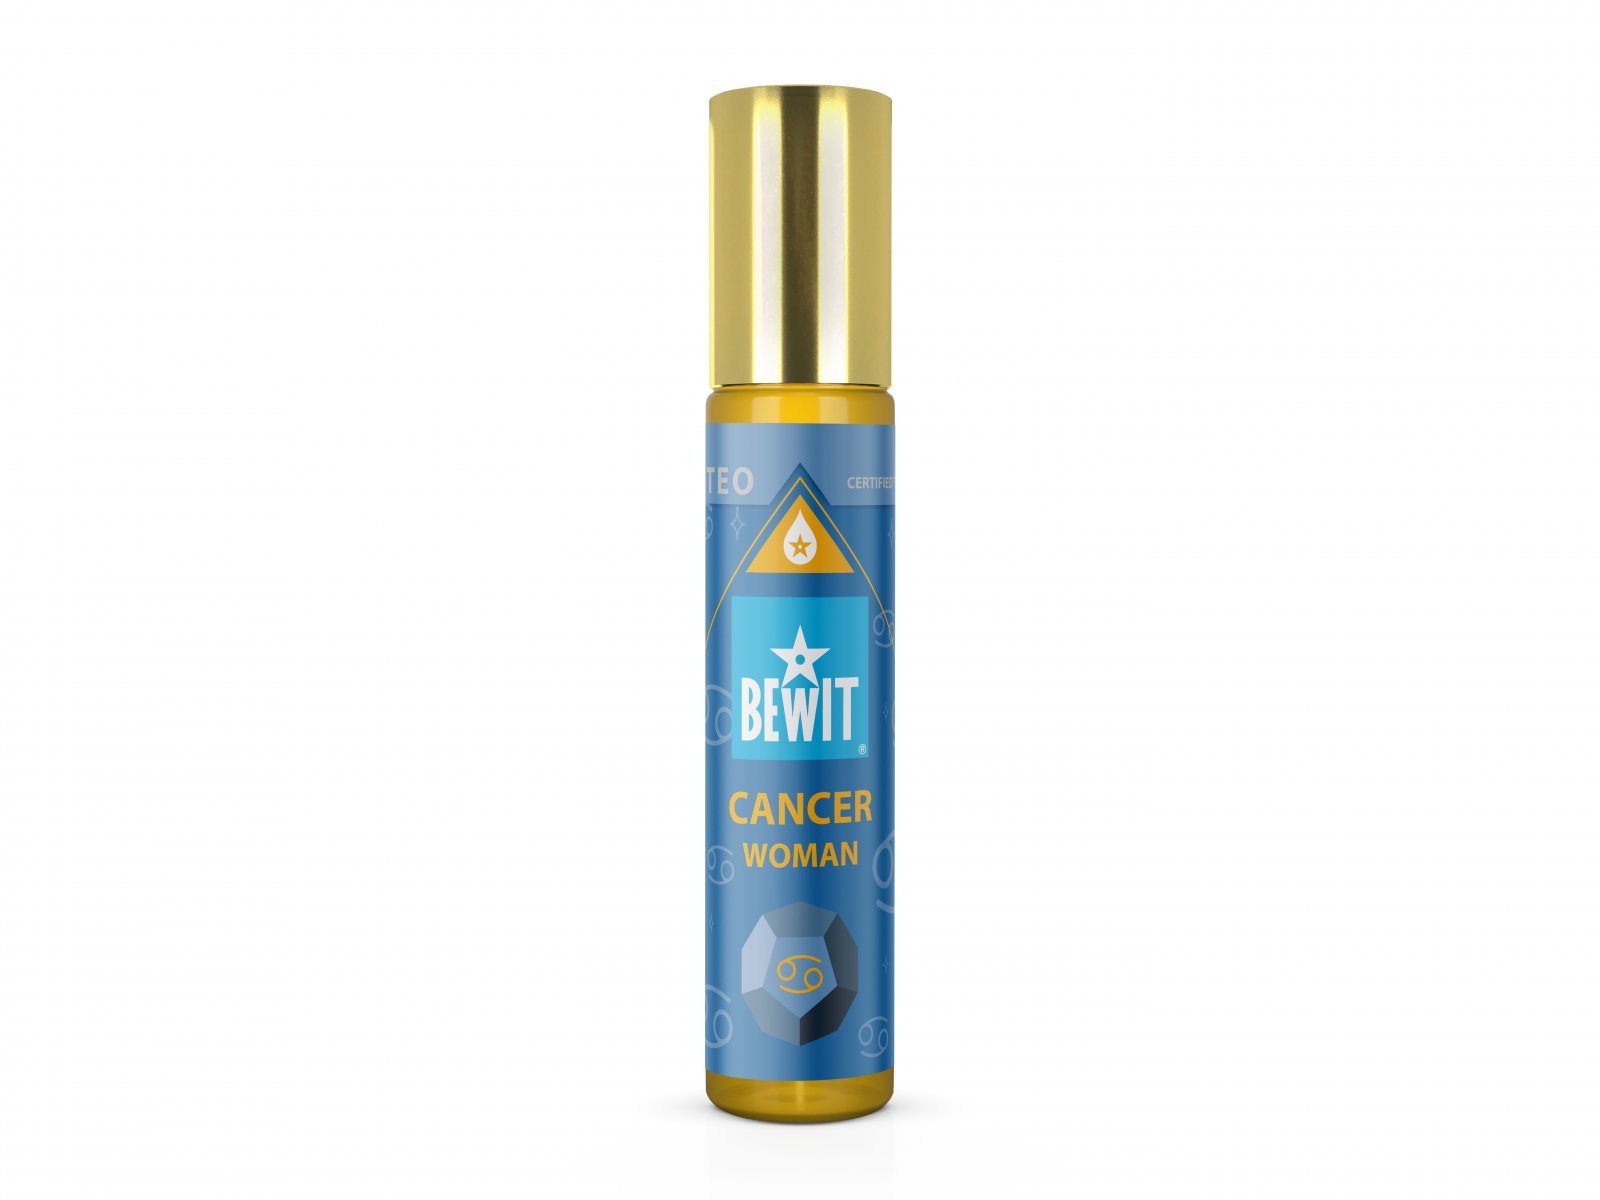 BEWIT WOMAN CANCER (CRAB) - Women's roll-on oil perfume